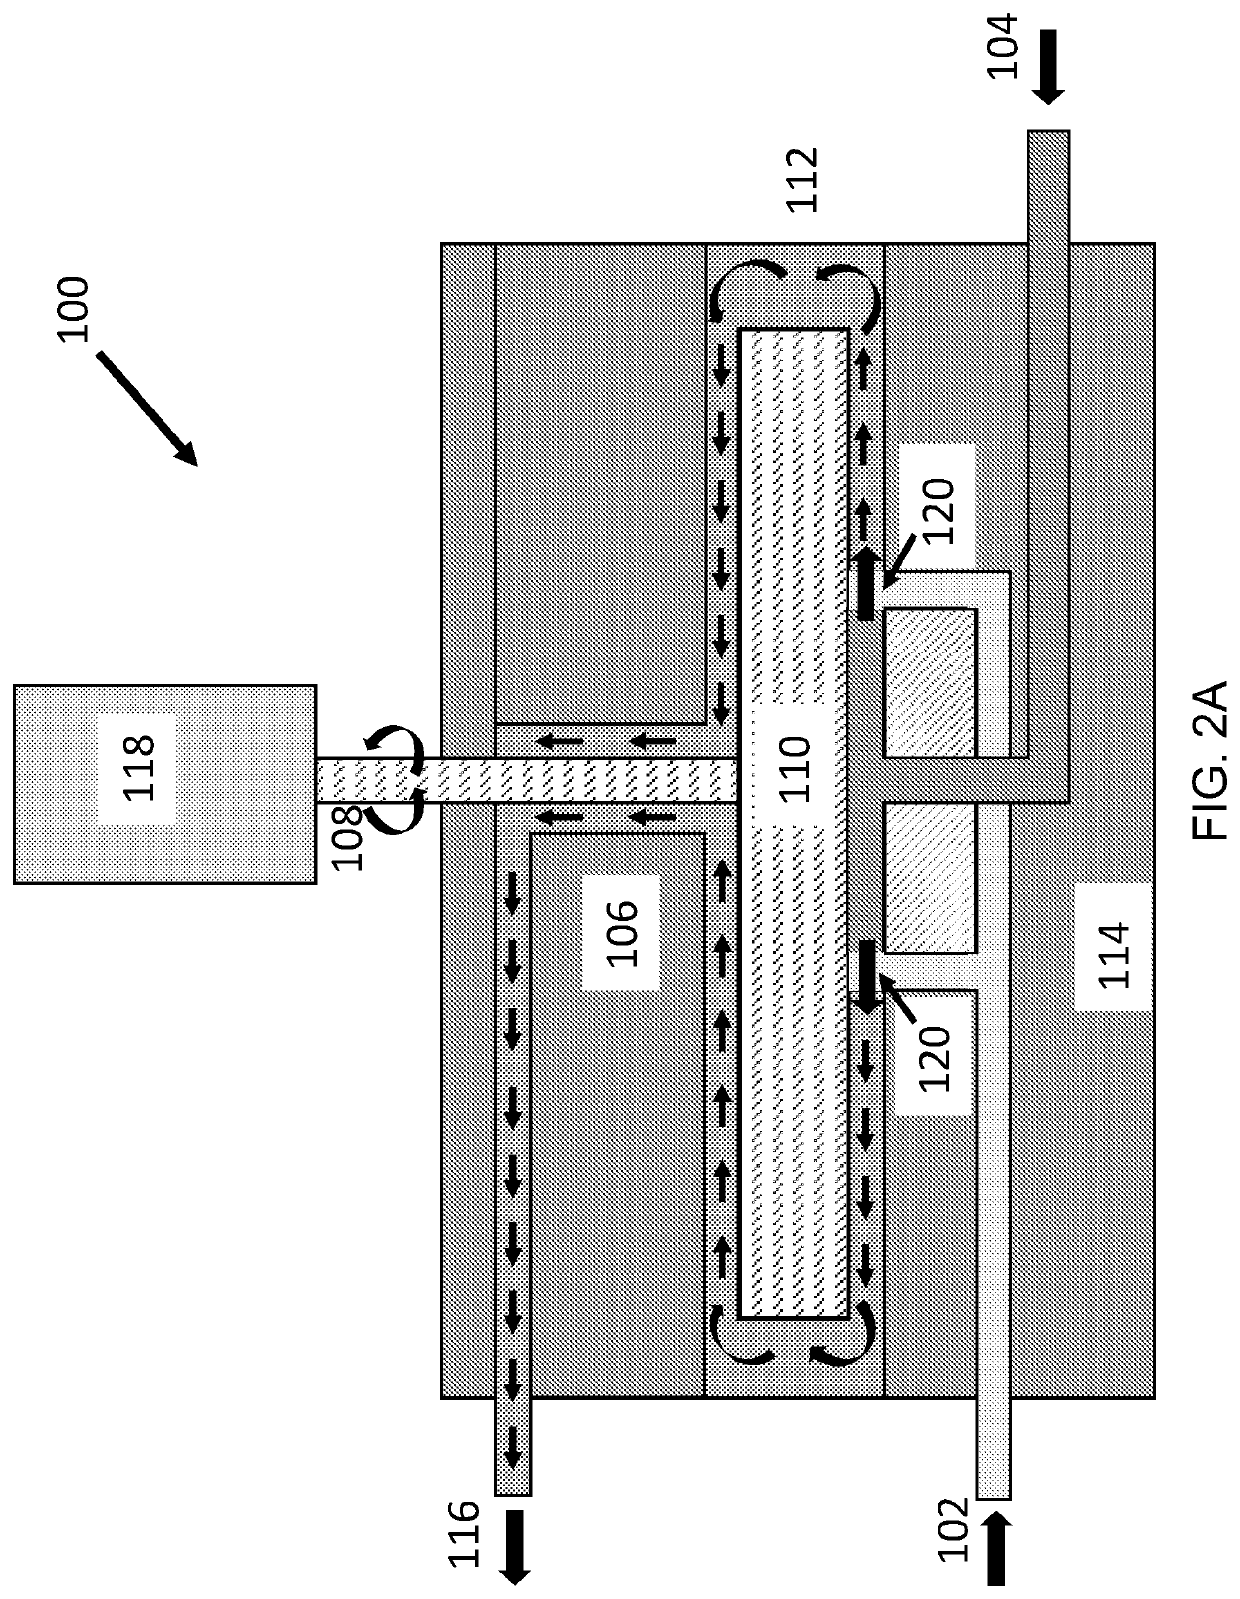 A Process for Producing Clean Coal Using Chemical Pre-Treatment and High Shear Reactor